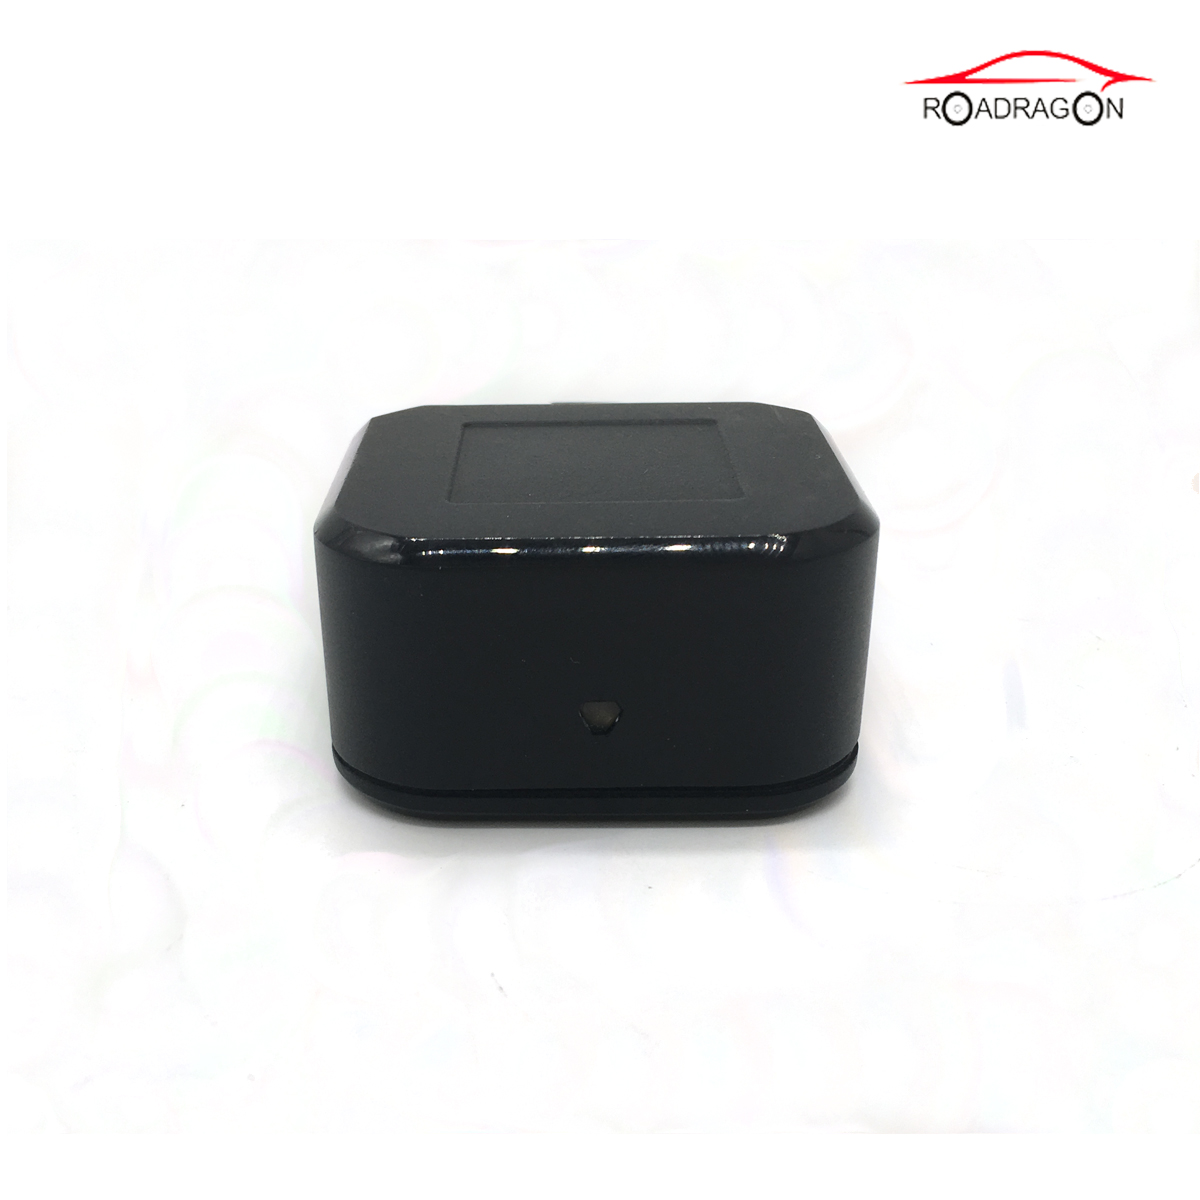 Discount wholesale Passtime Gps Install - The OBDII GPS tracker is designed based on OBDII/GPS/GSM/GPRS, Simply plug to vehicle OBDII Port to realize remote manage vehicle tracking and diagnostic, and transmit data to server via GPRS. – Dragon Bridge detail pictures